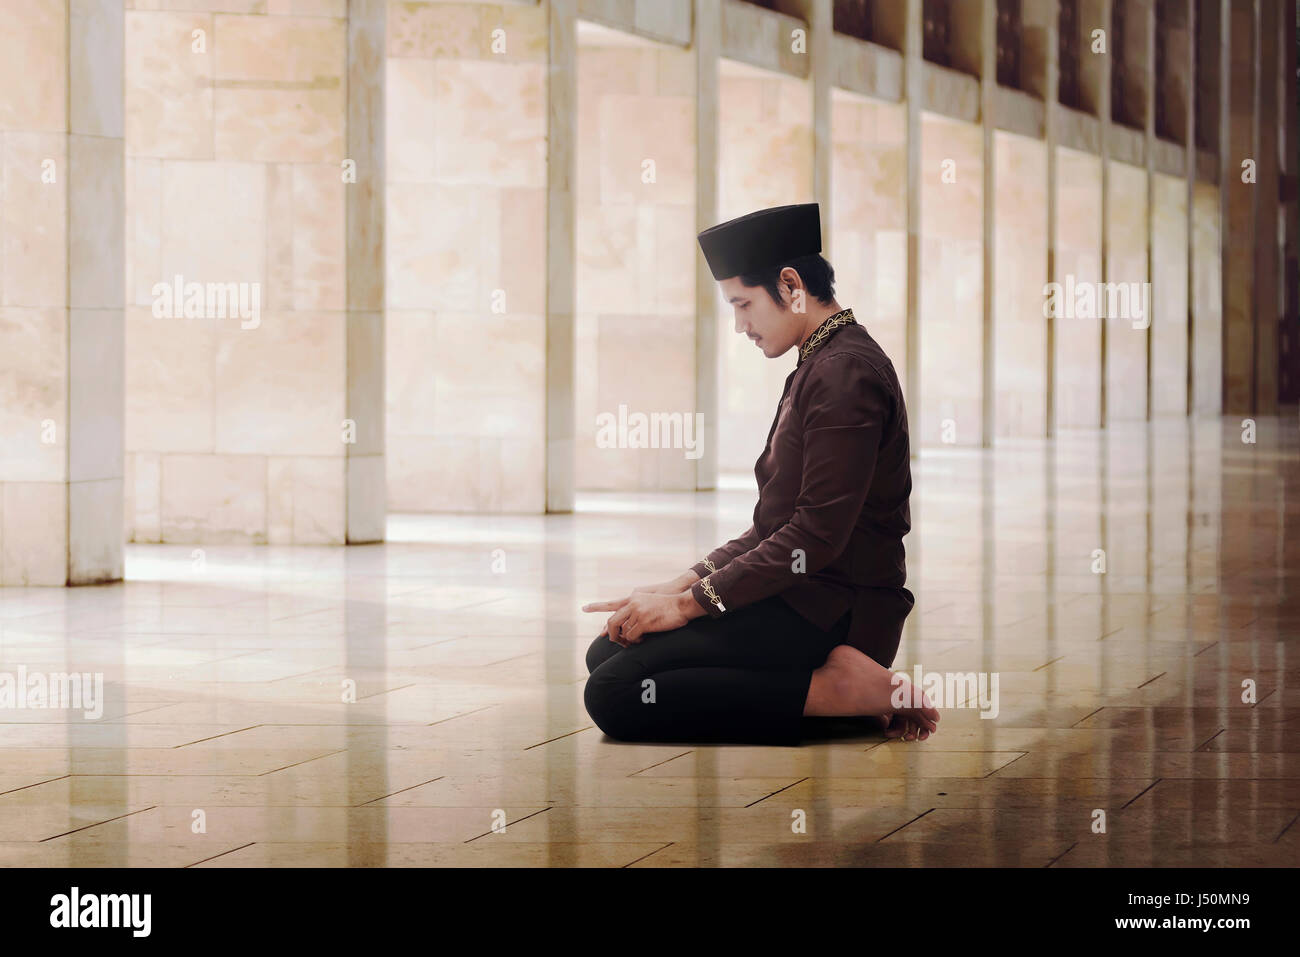 Religious asian muslim man with black cap praying in the mosque Stock Photo